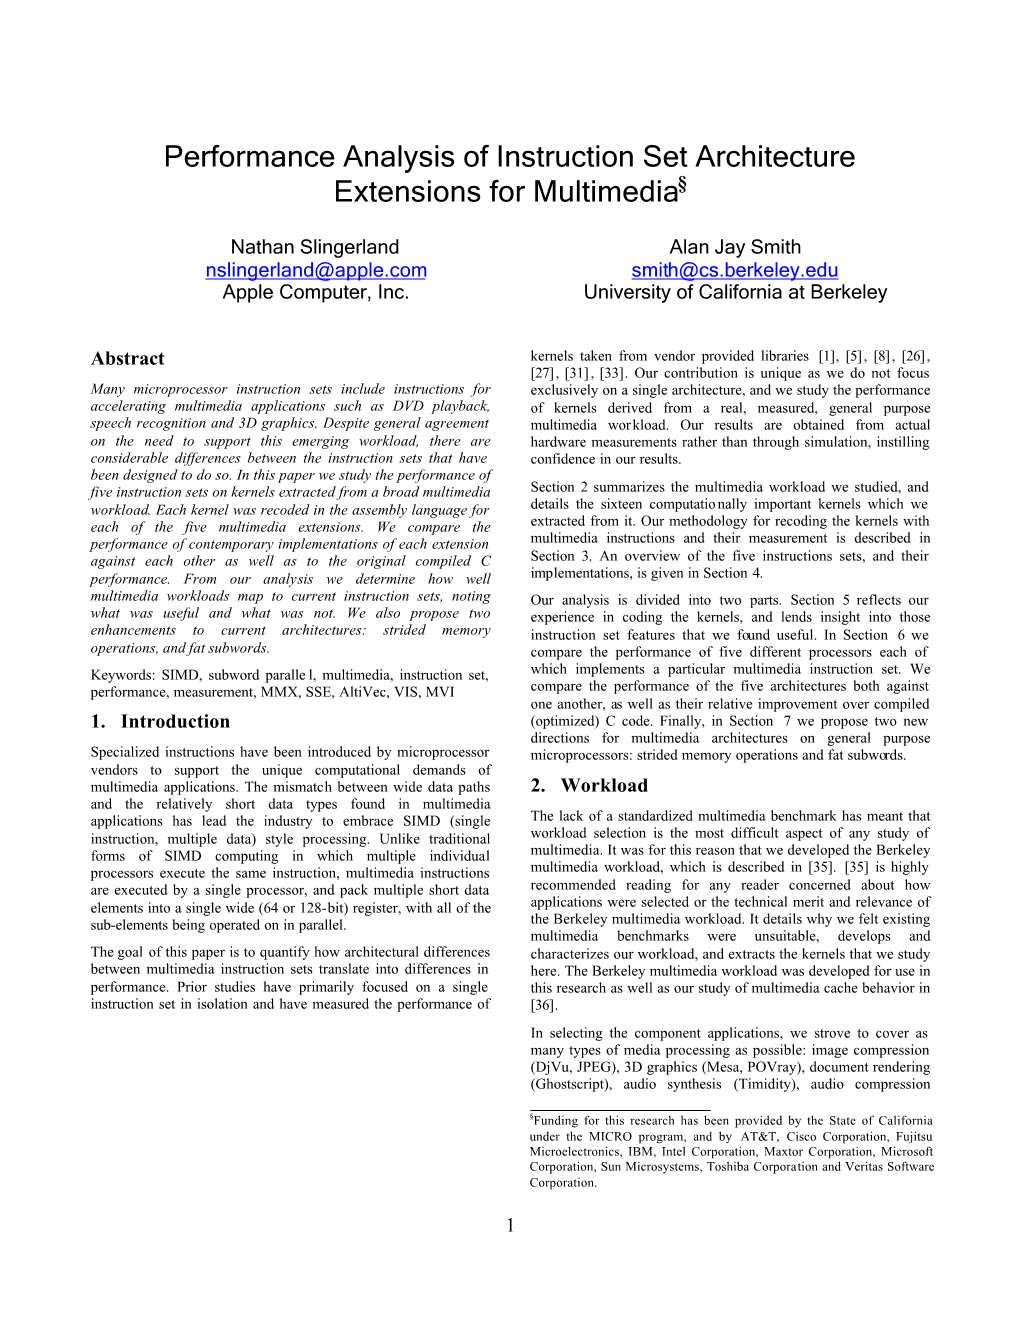 Performance Analysis of Instruction Set Architecture Extensions for Multimedia§